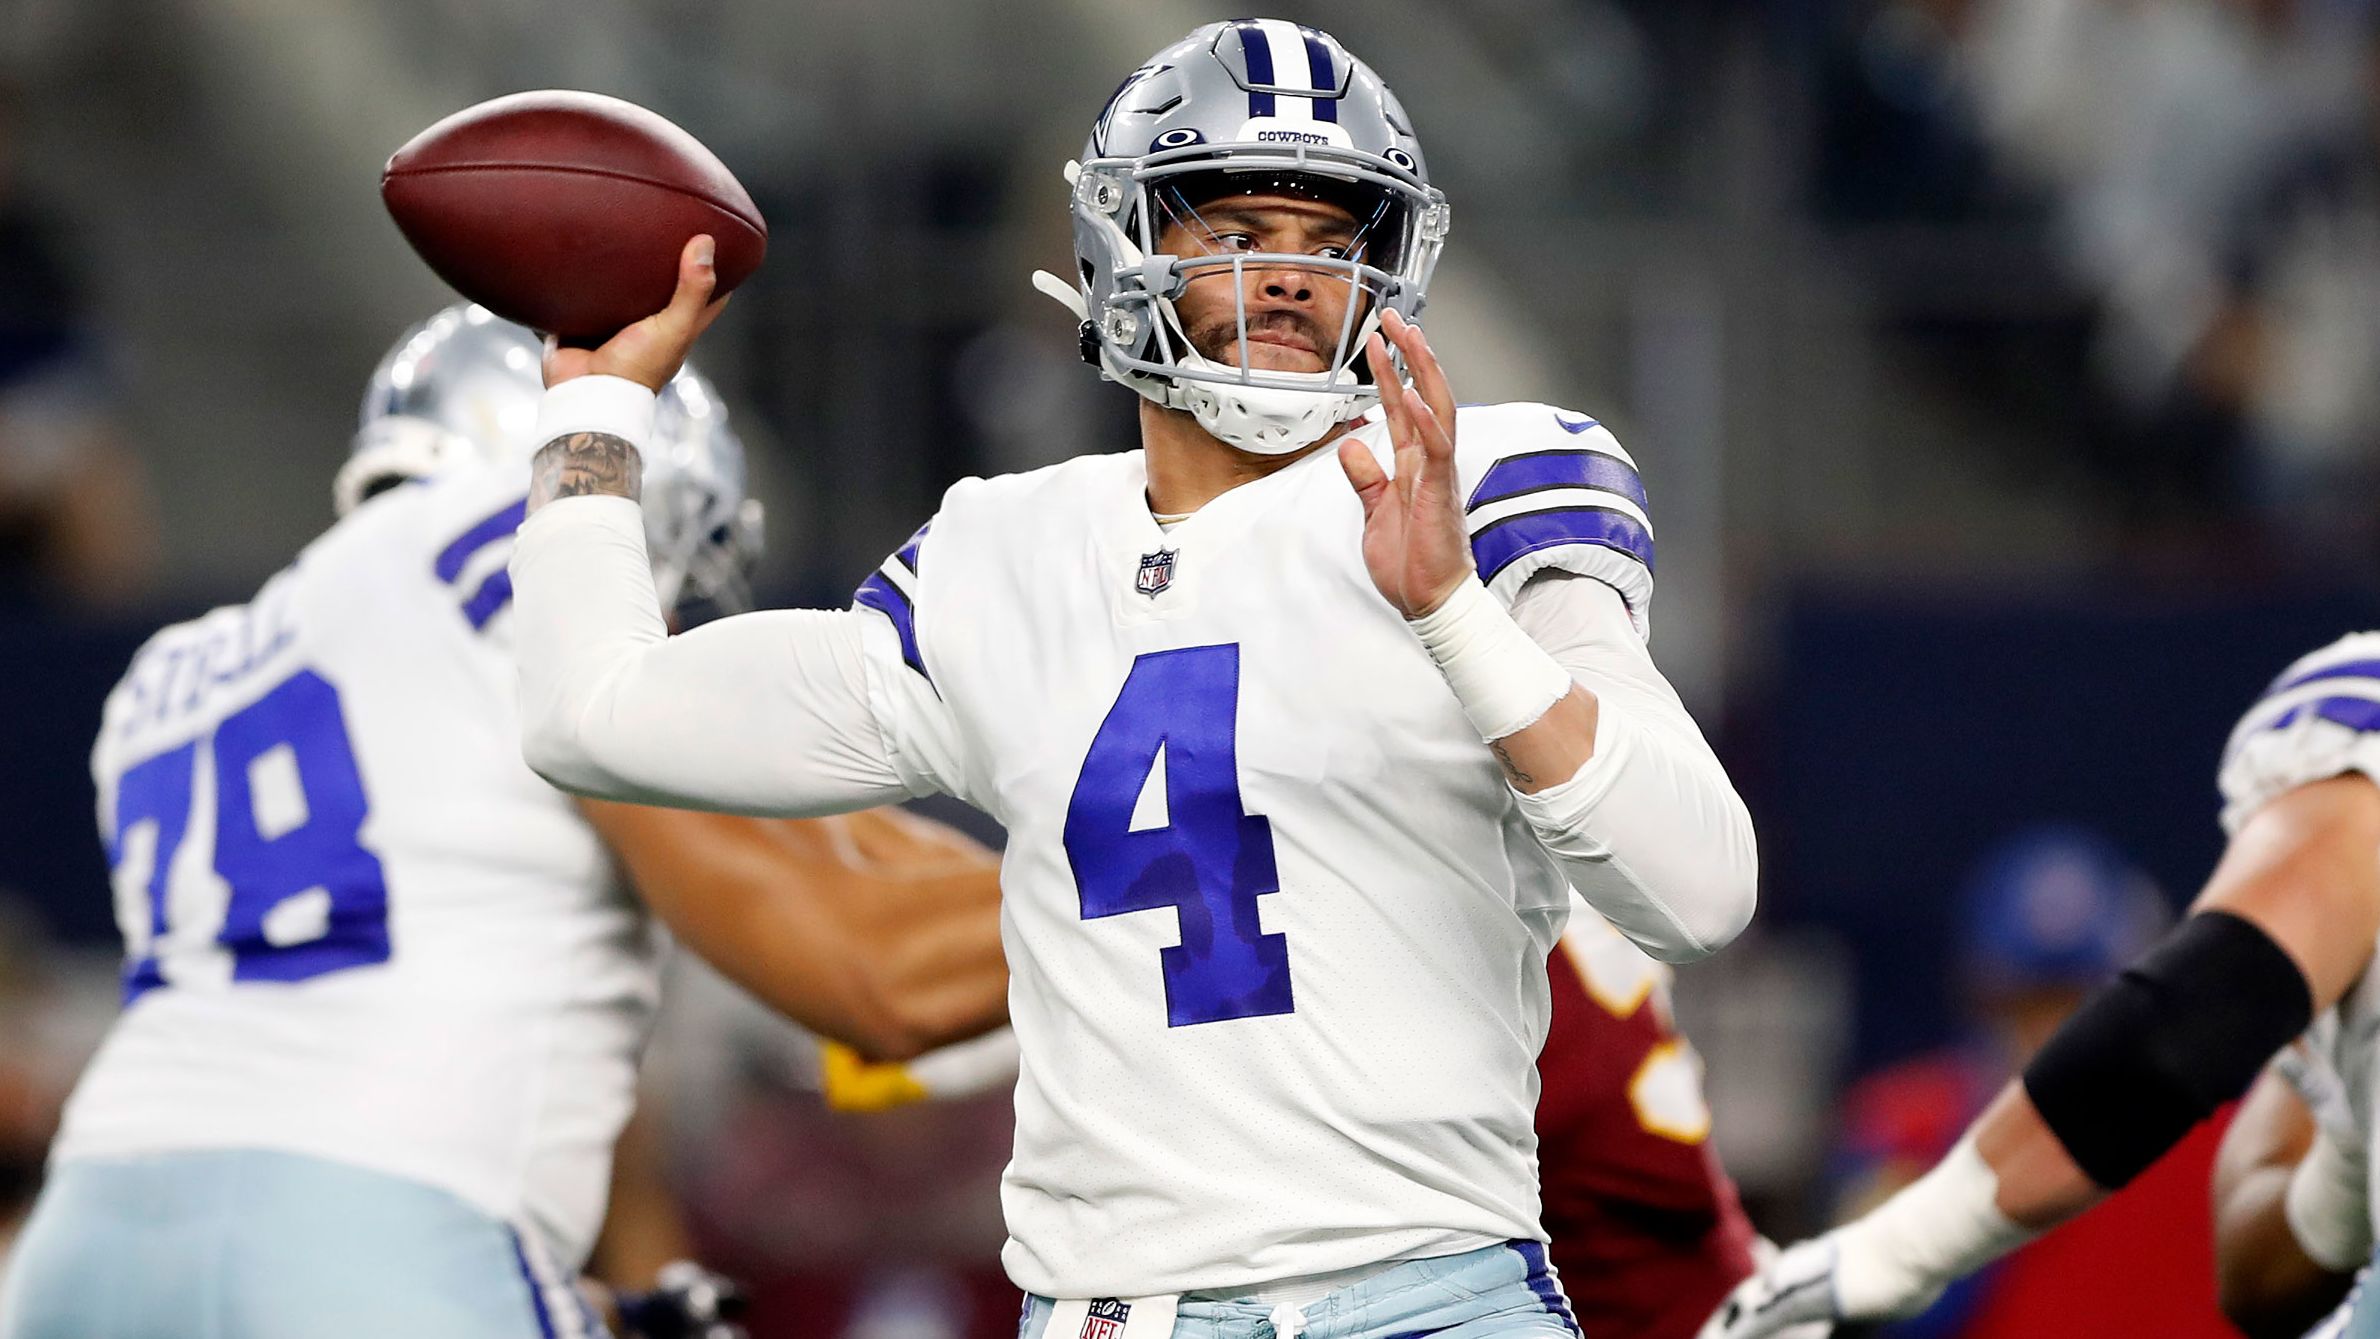 Dak Prescott #4 of the Dallas Cowboys throws a pass during the first half against the Washington Football Team at the AT&T Stadium on December 26, 2021 in Arlington, Texas.